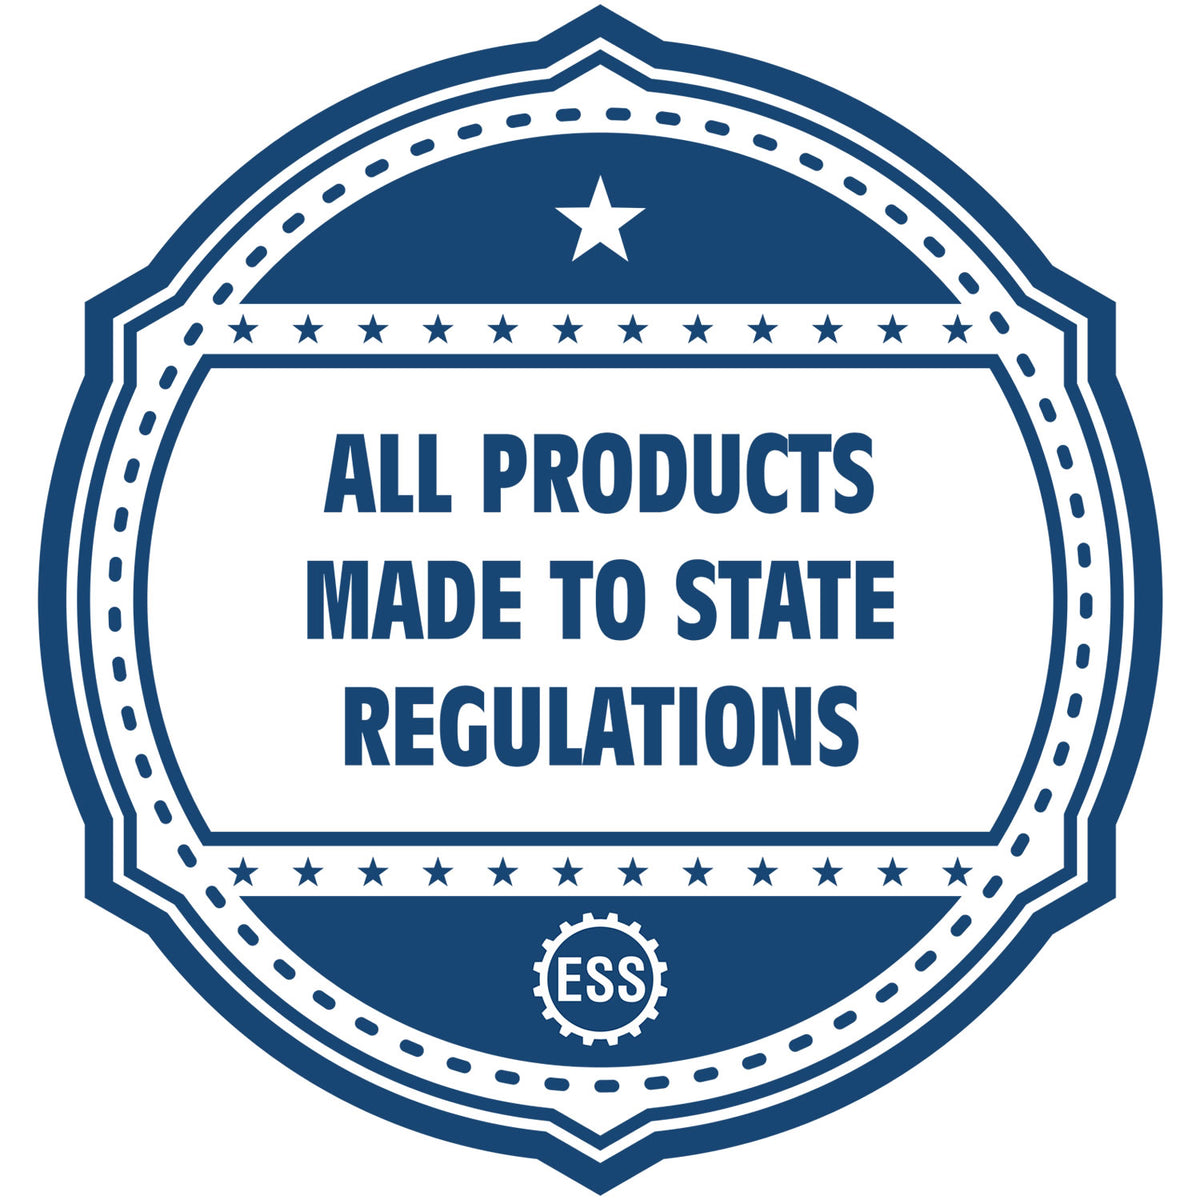 An icon or badge element for the Heavy Duty Cast Iron New Mexico Engineer Seal Embosser showing that this product is made in compliance with state regulations.